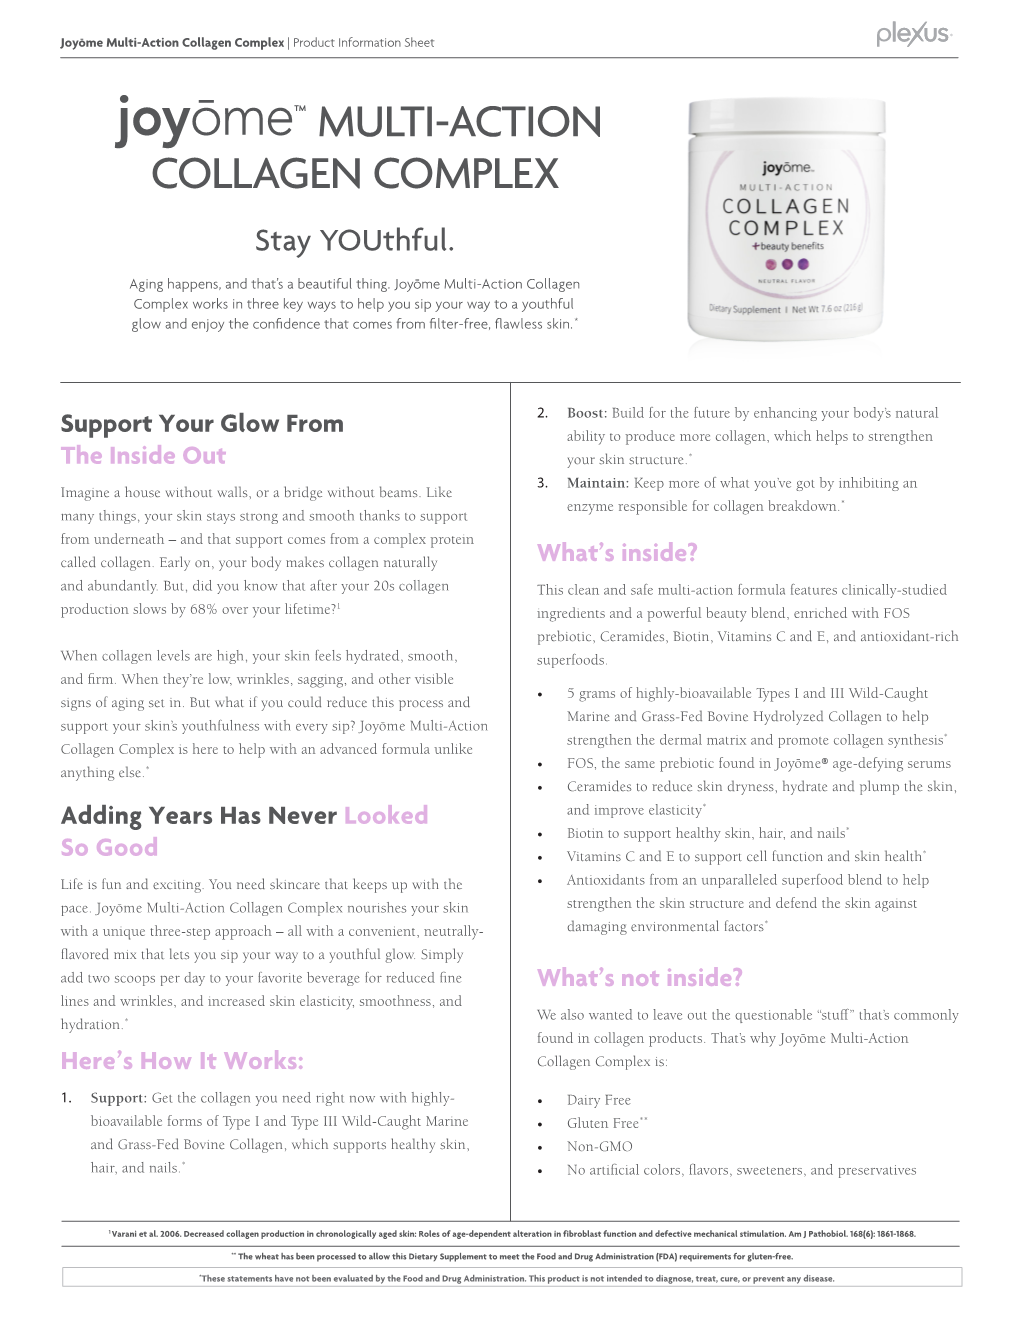 ™ MULTI-ACTION COLLAGEN COMPLEX Stay Youthful